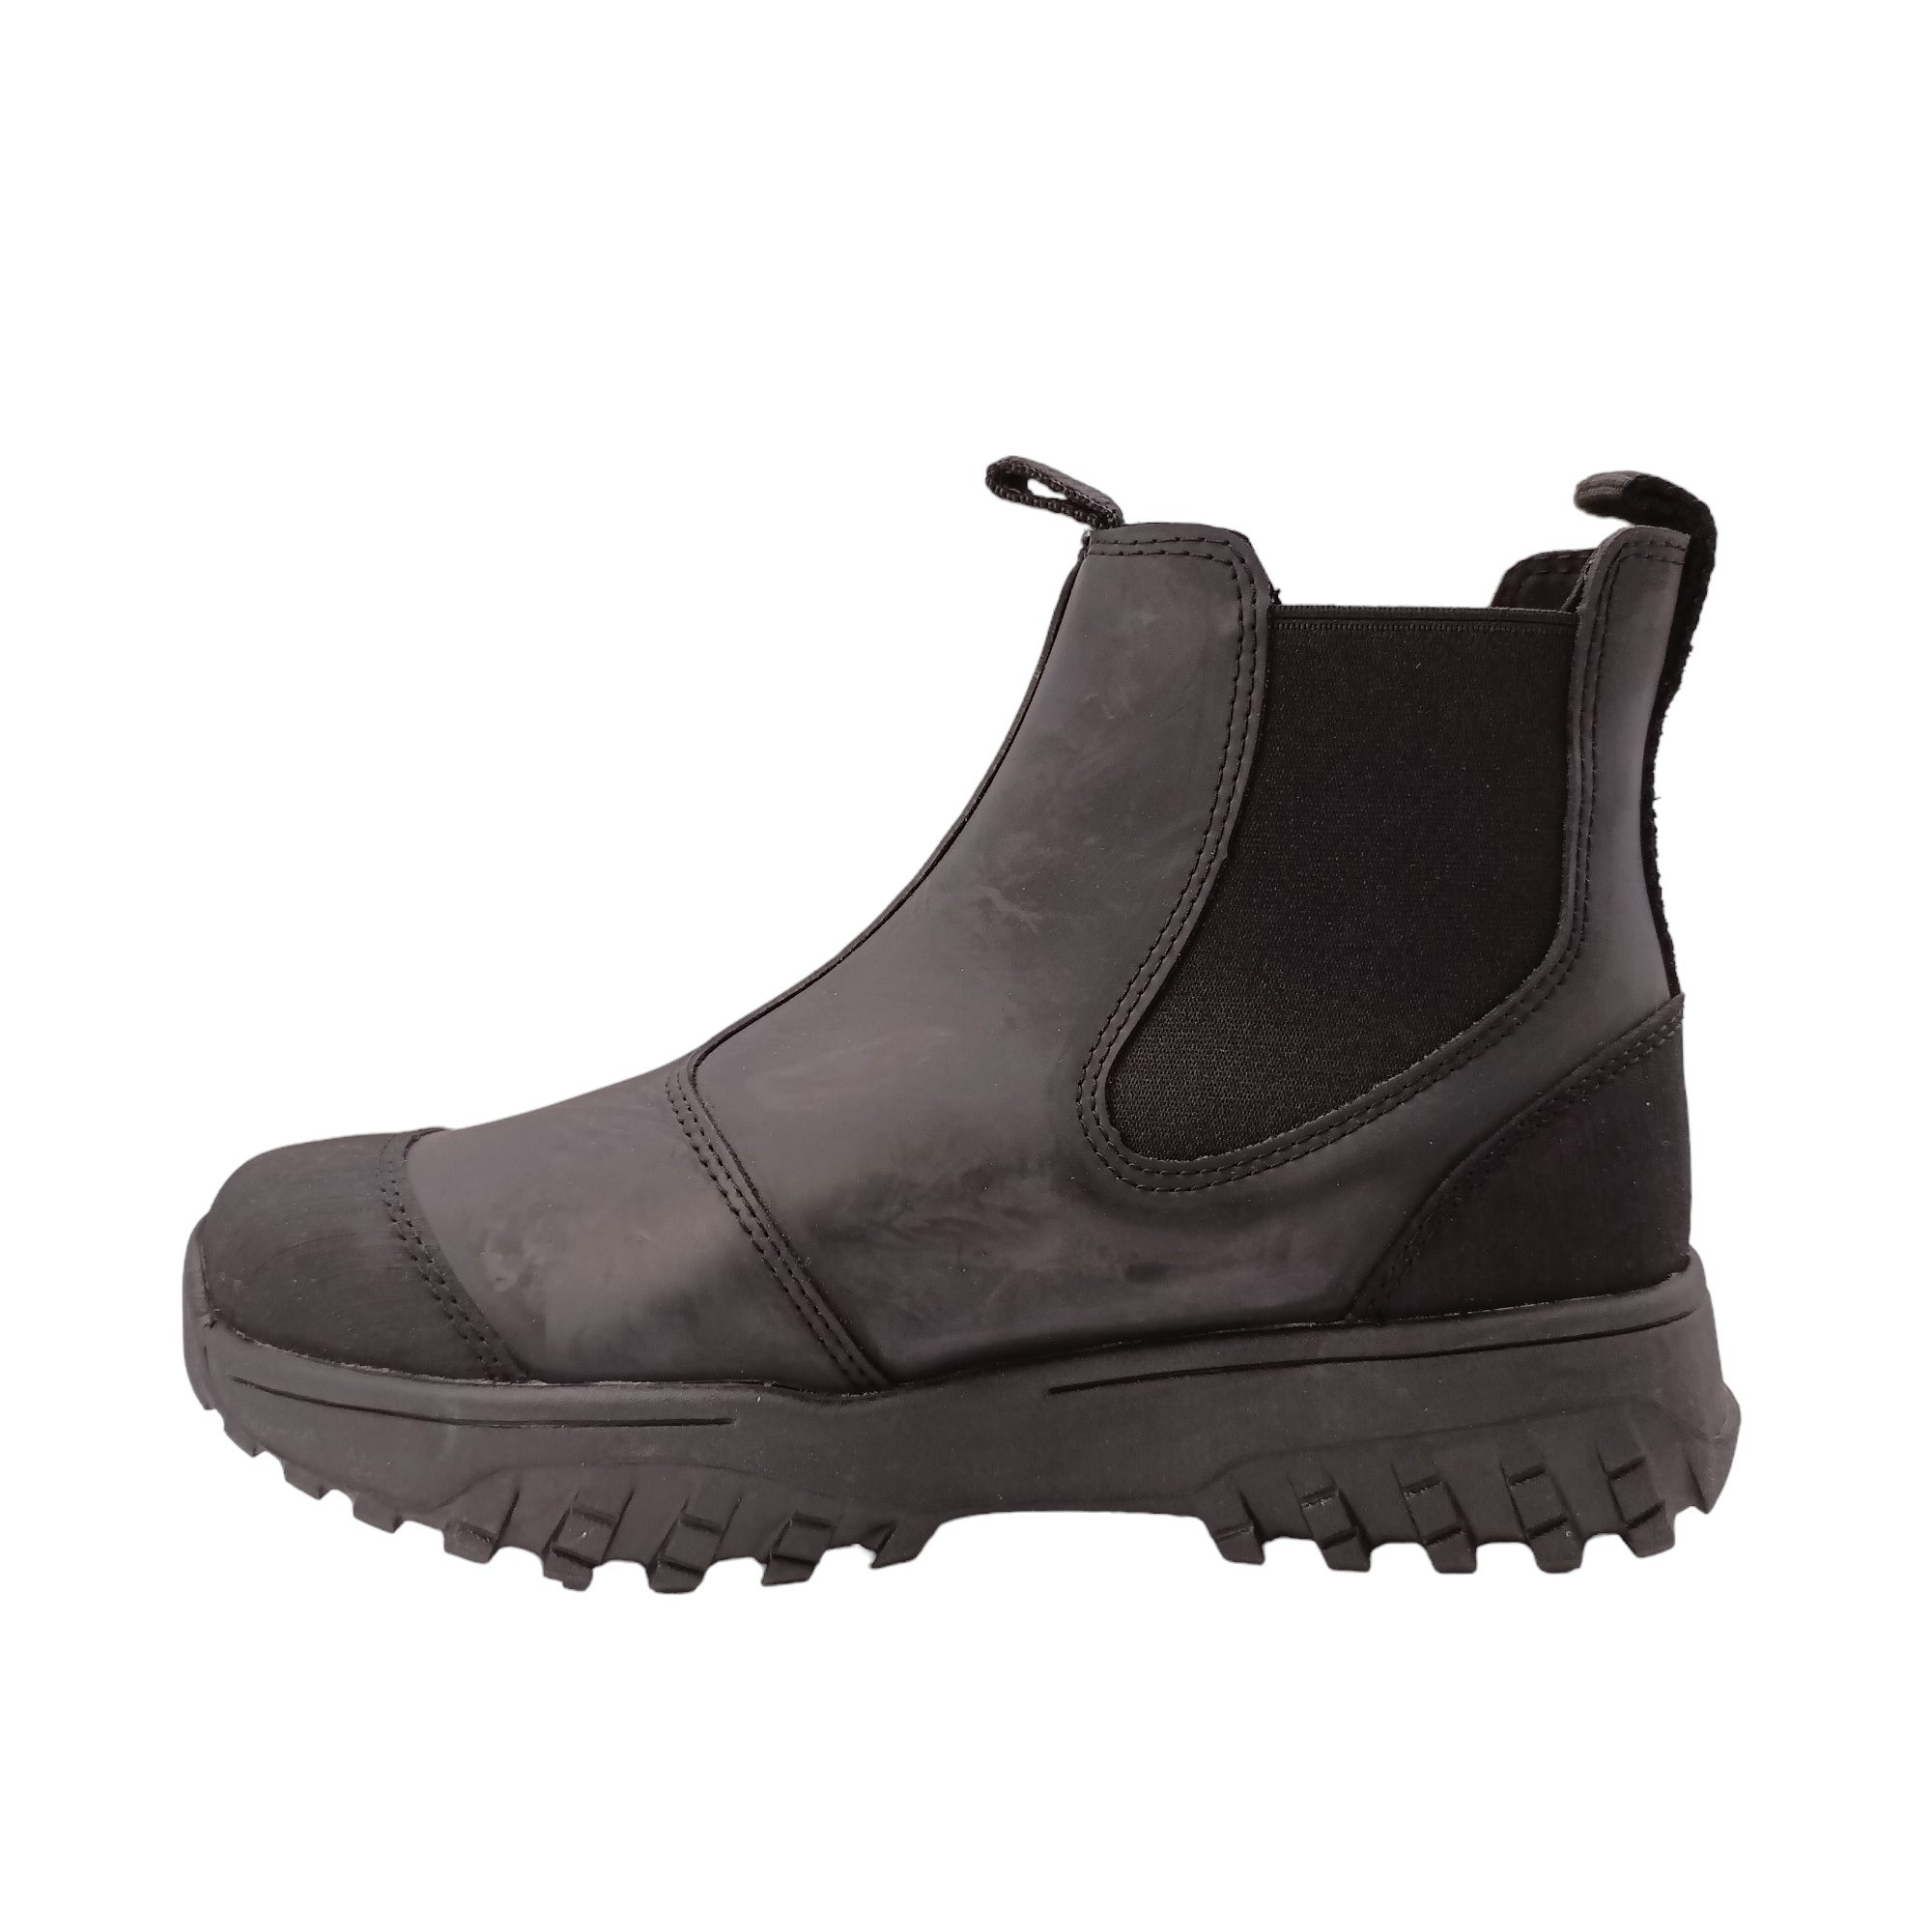 Shop Magda Waterproof Woden - with shoe&me - from Woden - Boots - boots, Winter, Womens - [collection]